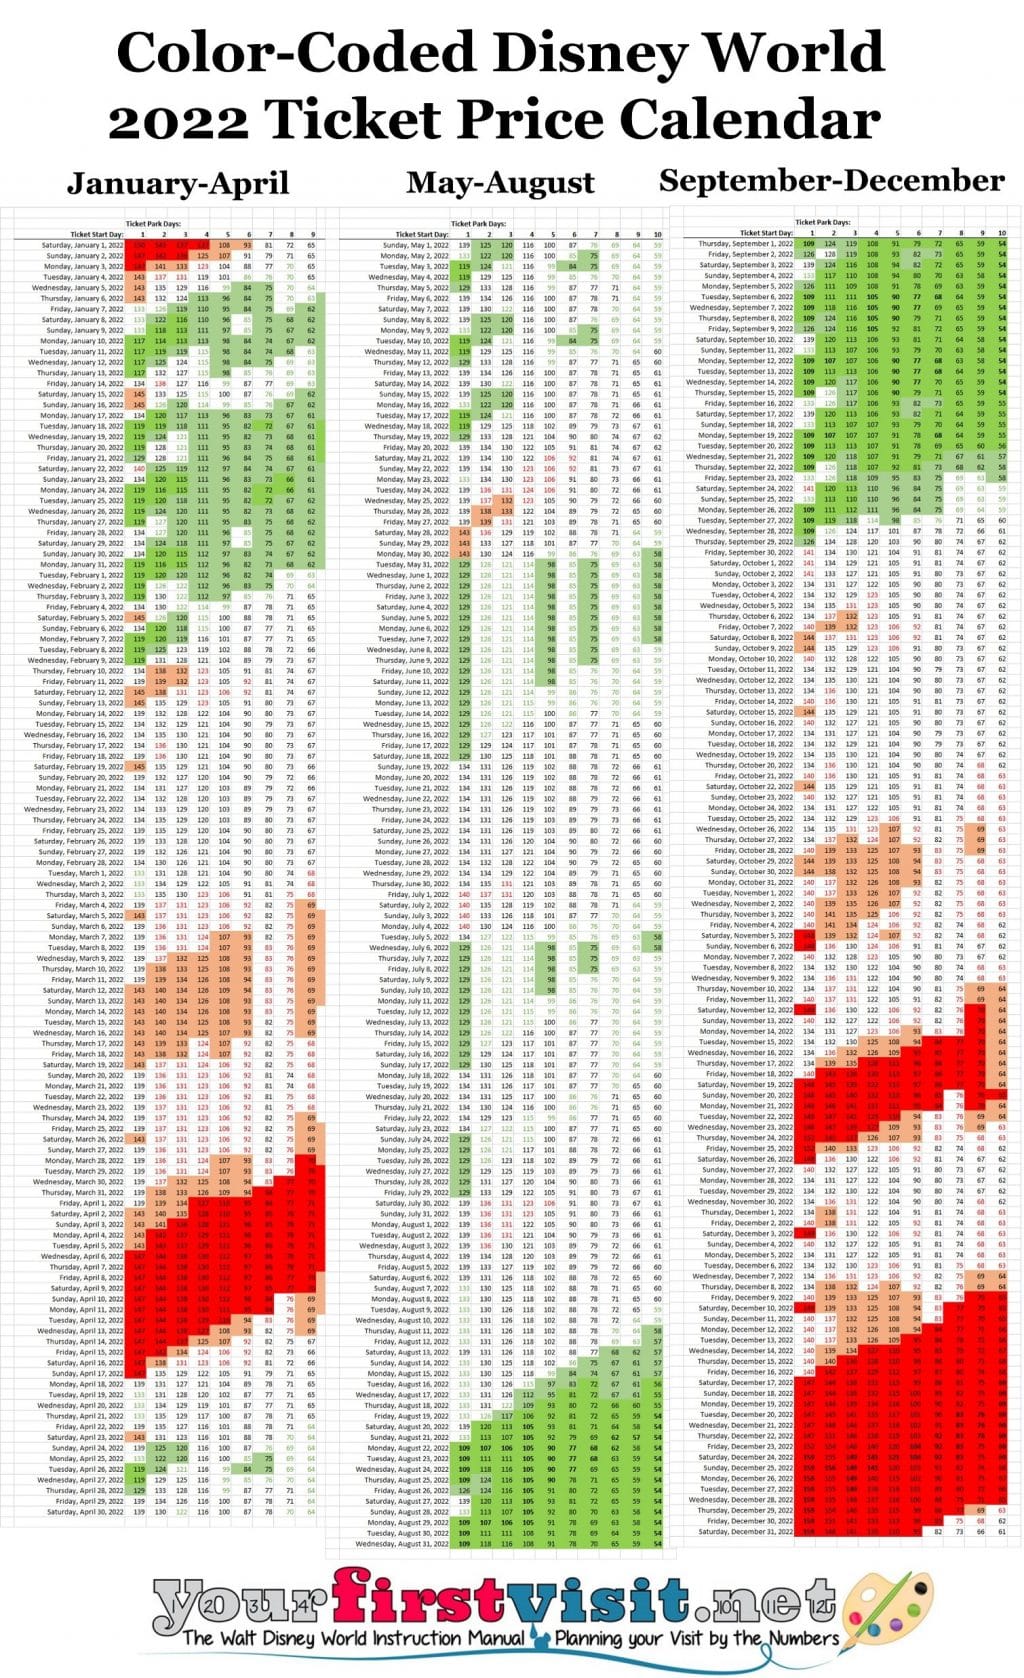 Crowd Calendar 2022 Disney World 2022 Ticket Prices In A Color-Coded Calendar -  Yourfirstvisit.net